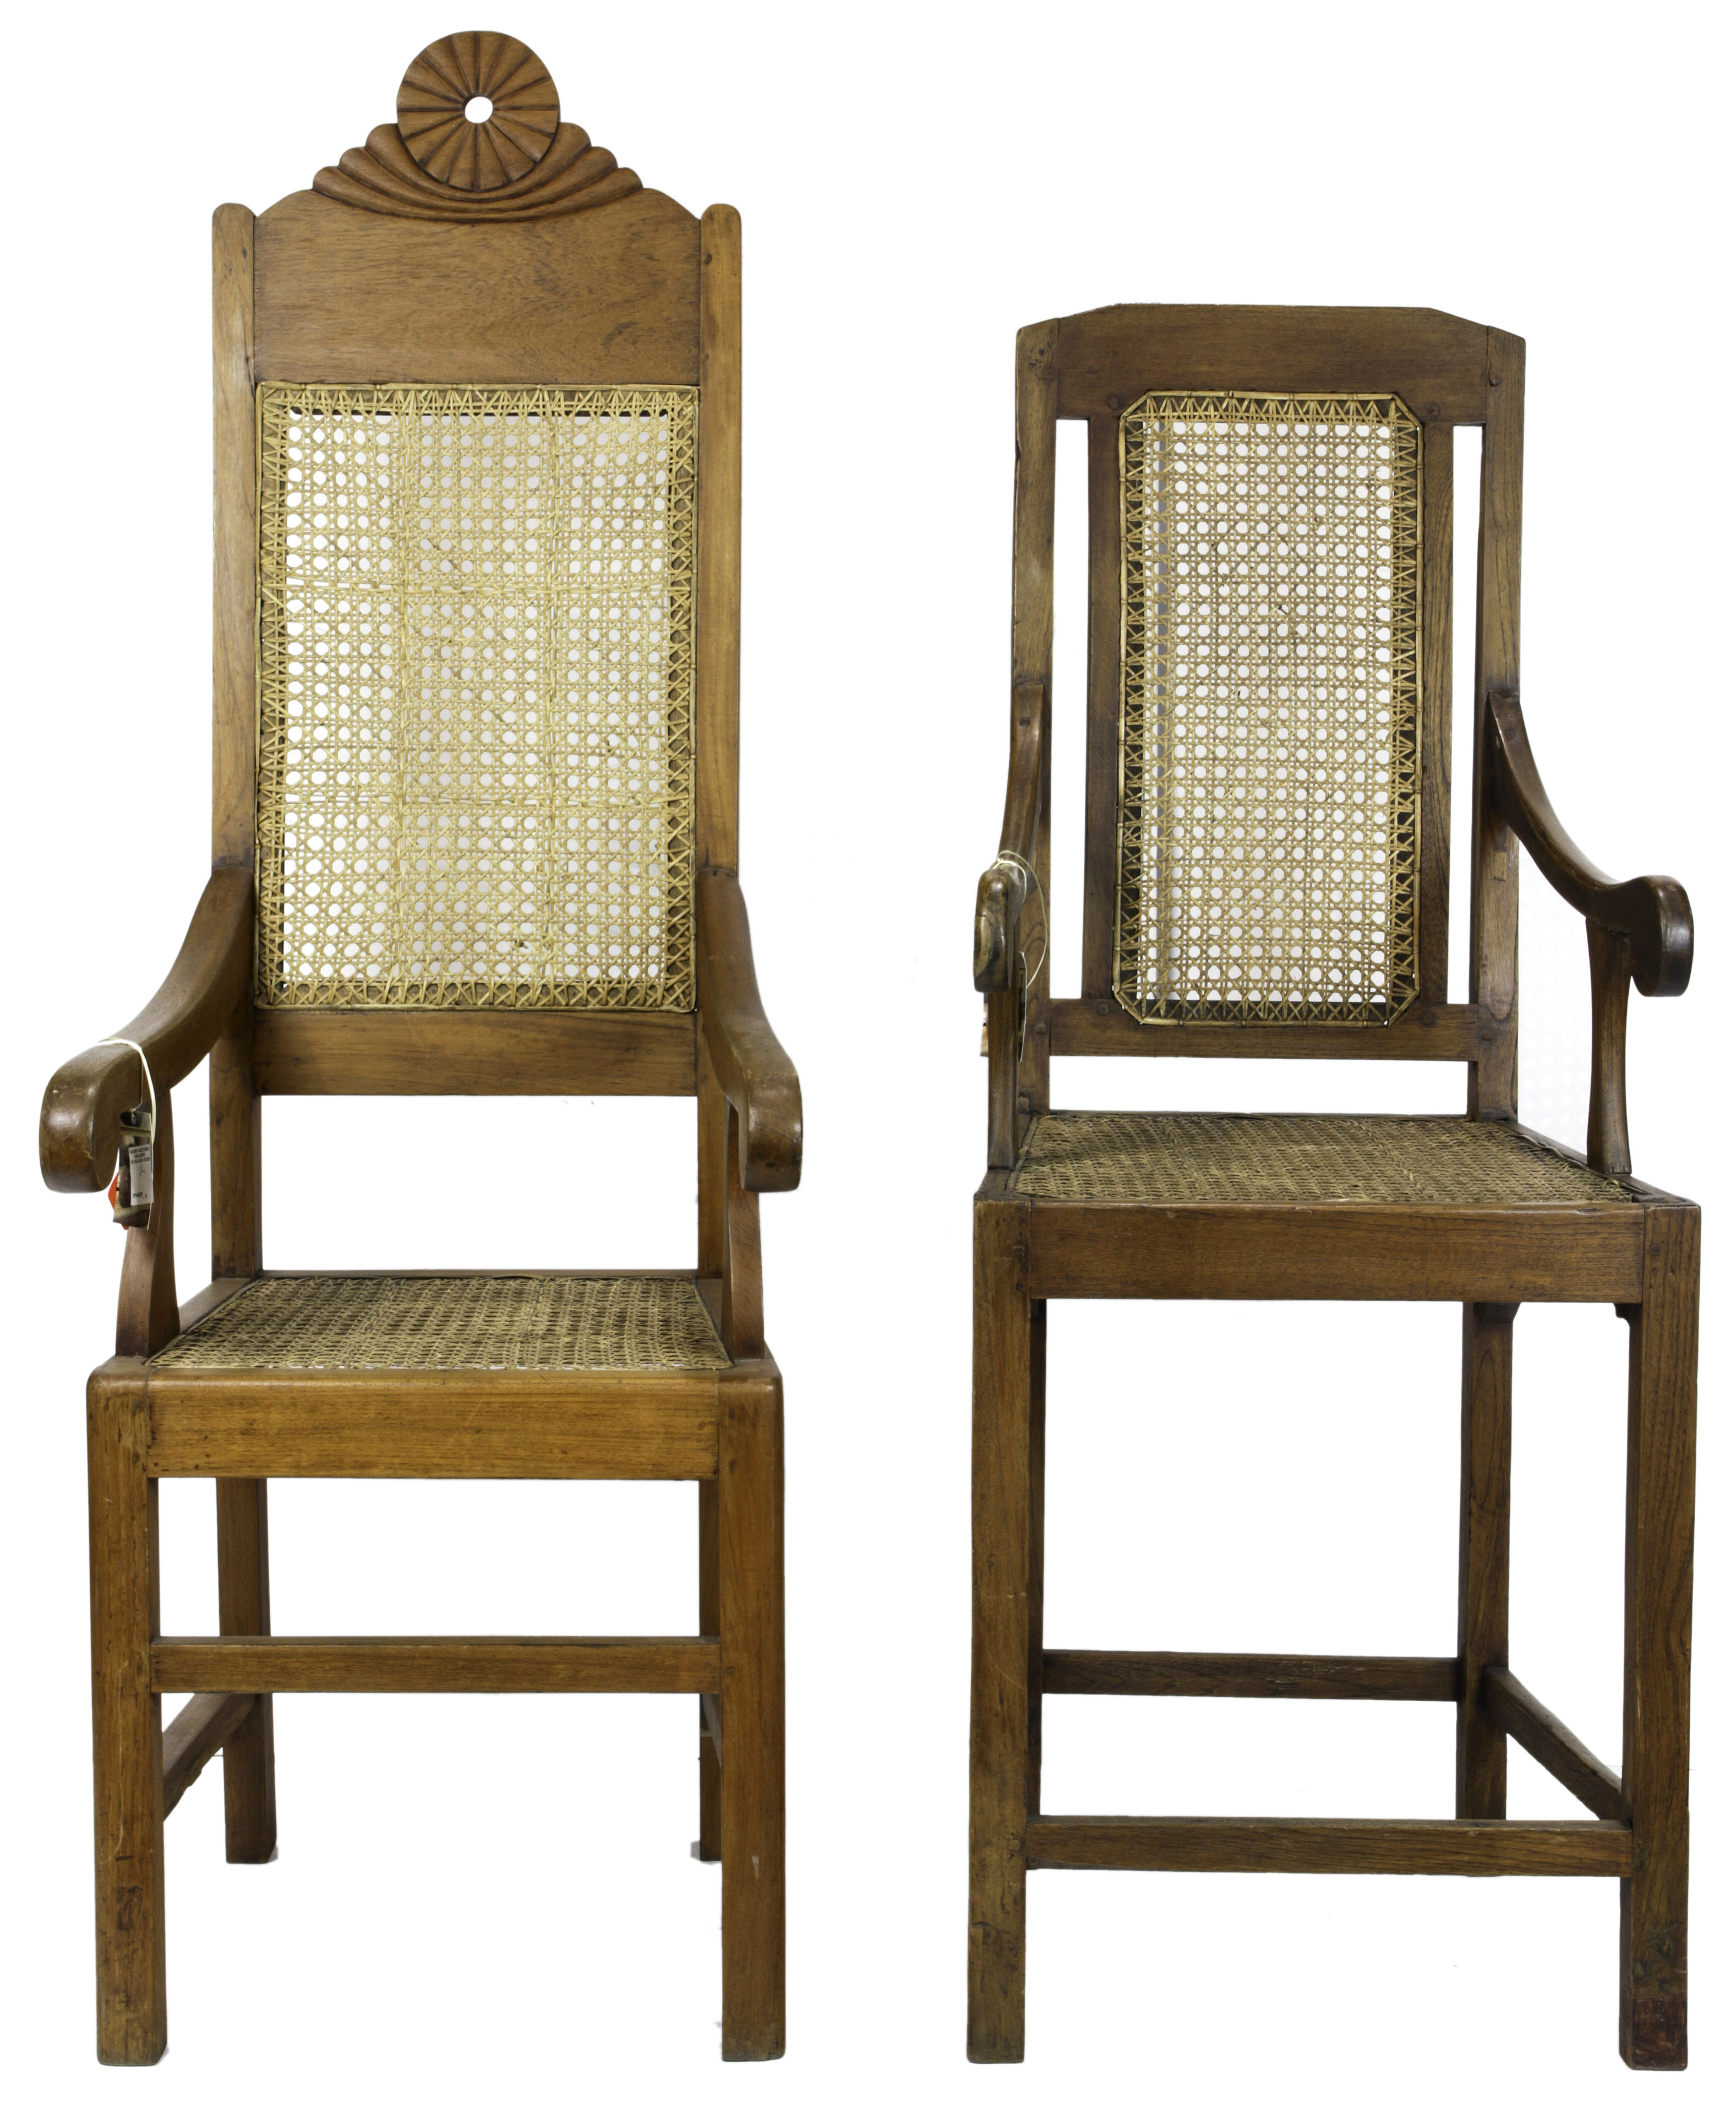 (LOT OF 2) BADMINTON REFEREE CHAIRS